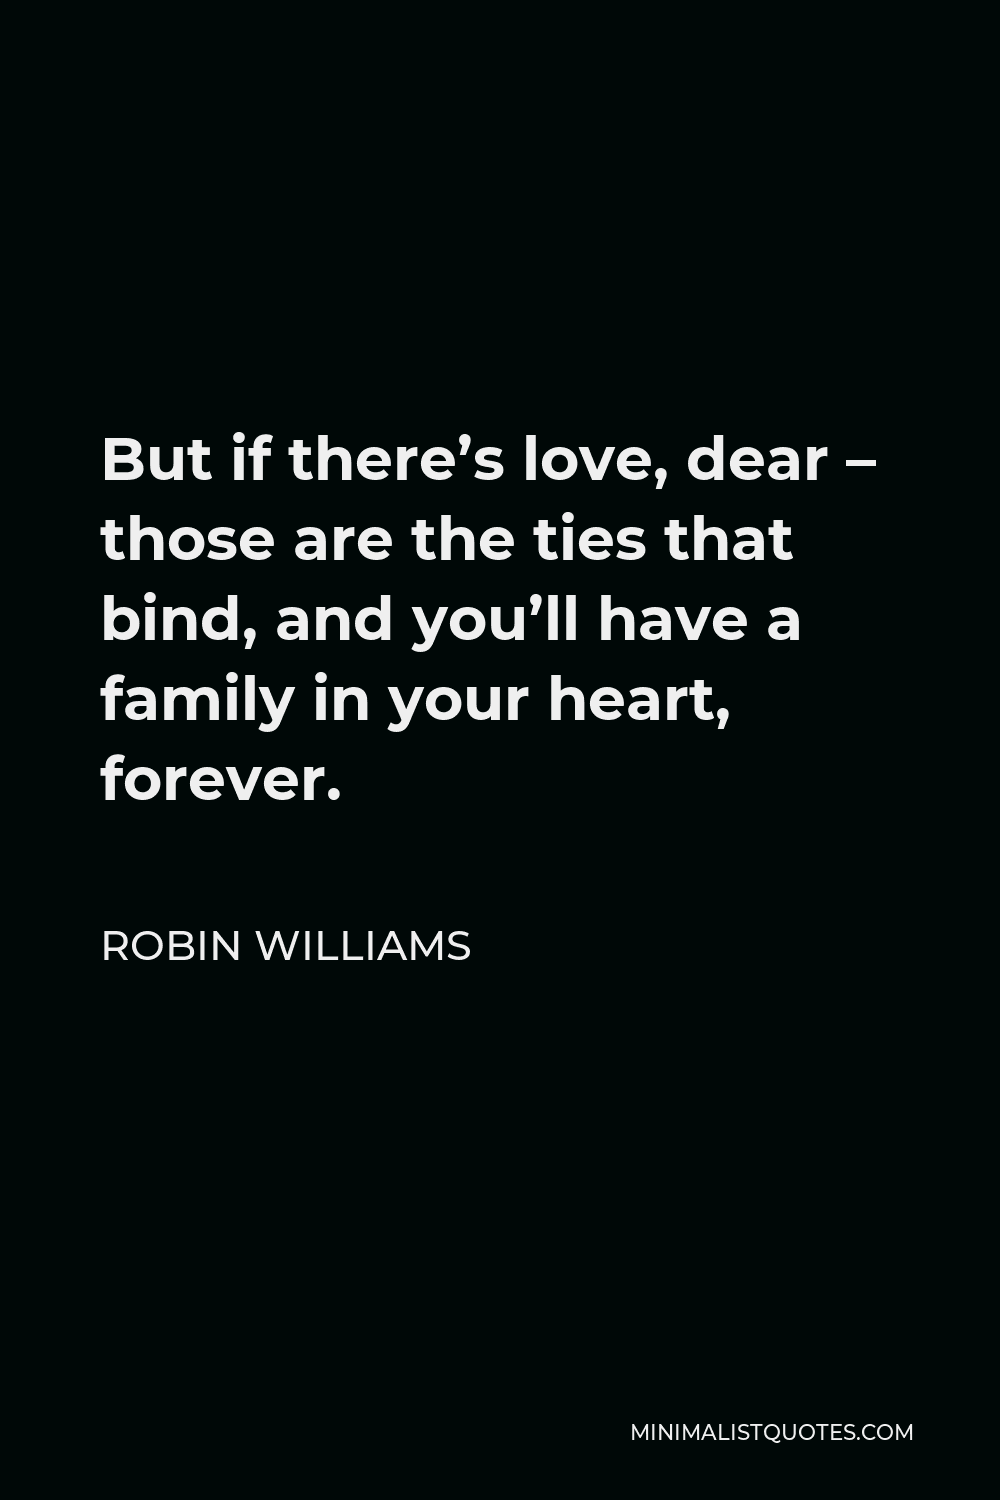 Robin Williams Quote - But if there’s love, dear – those are the ties that bind, and you’ll have a family in your heart, forever.